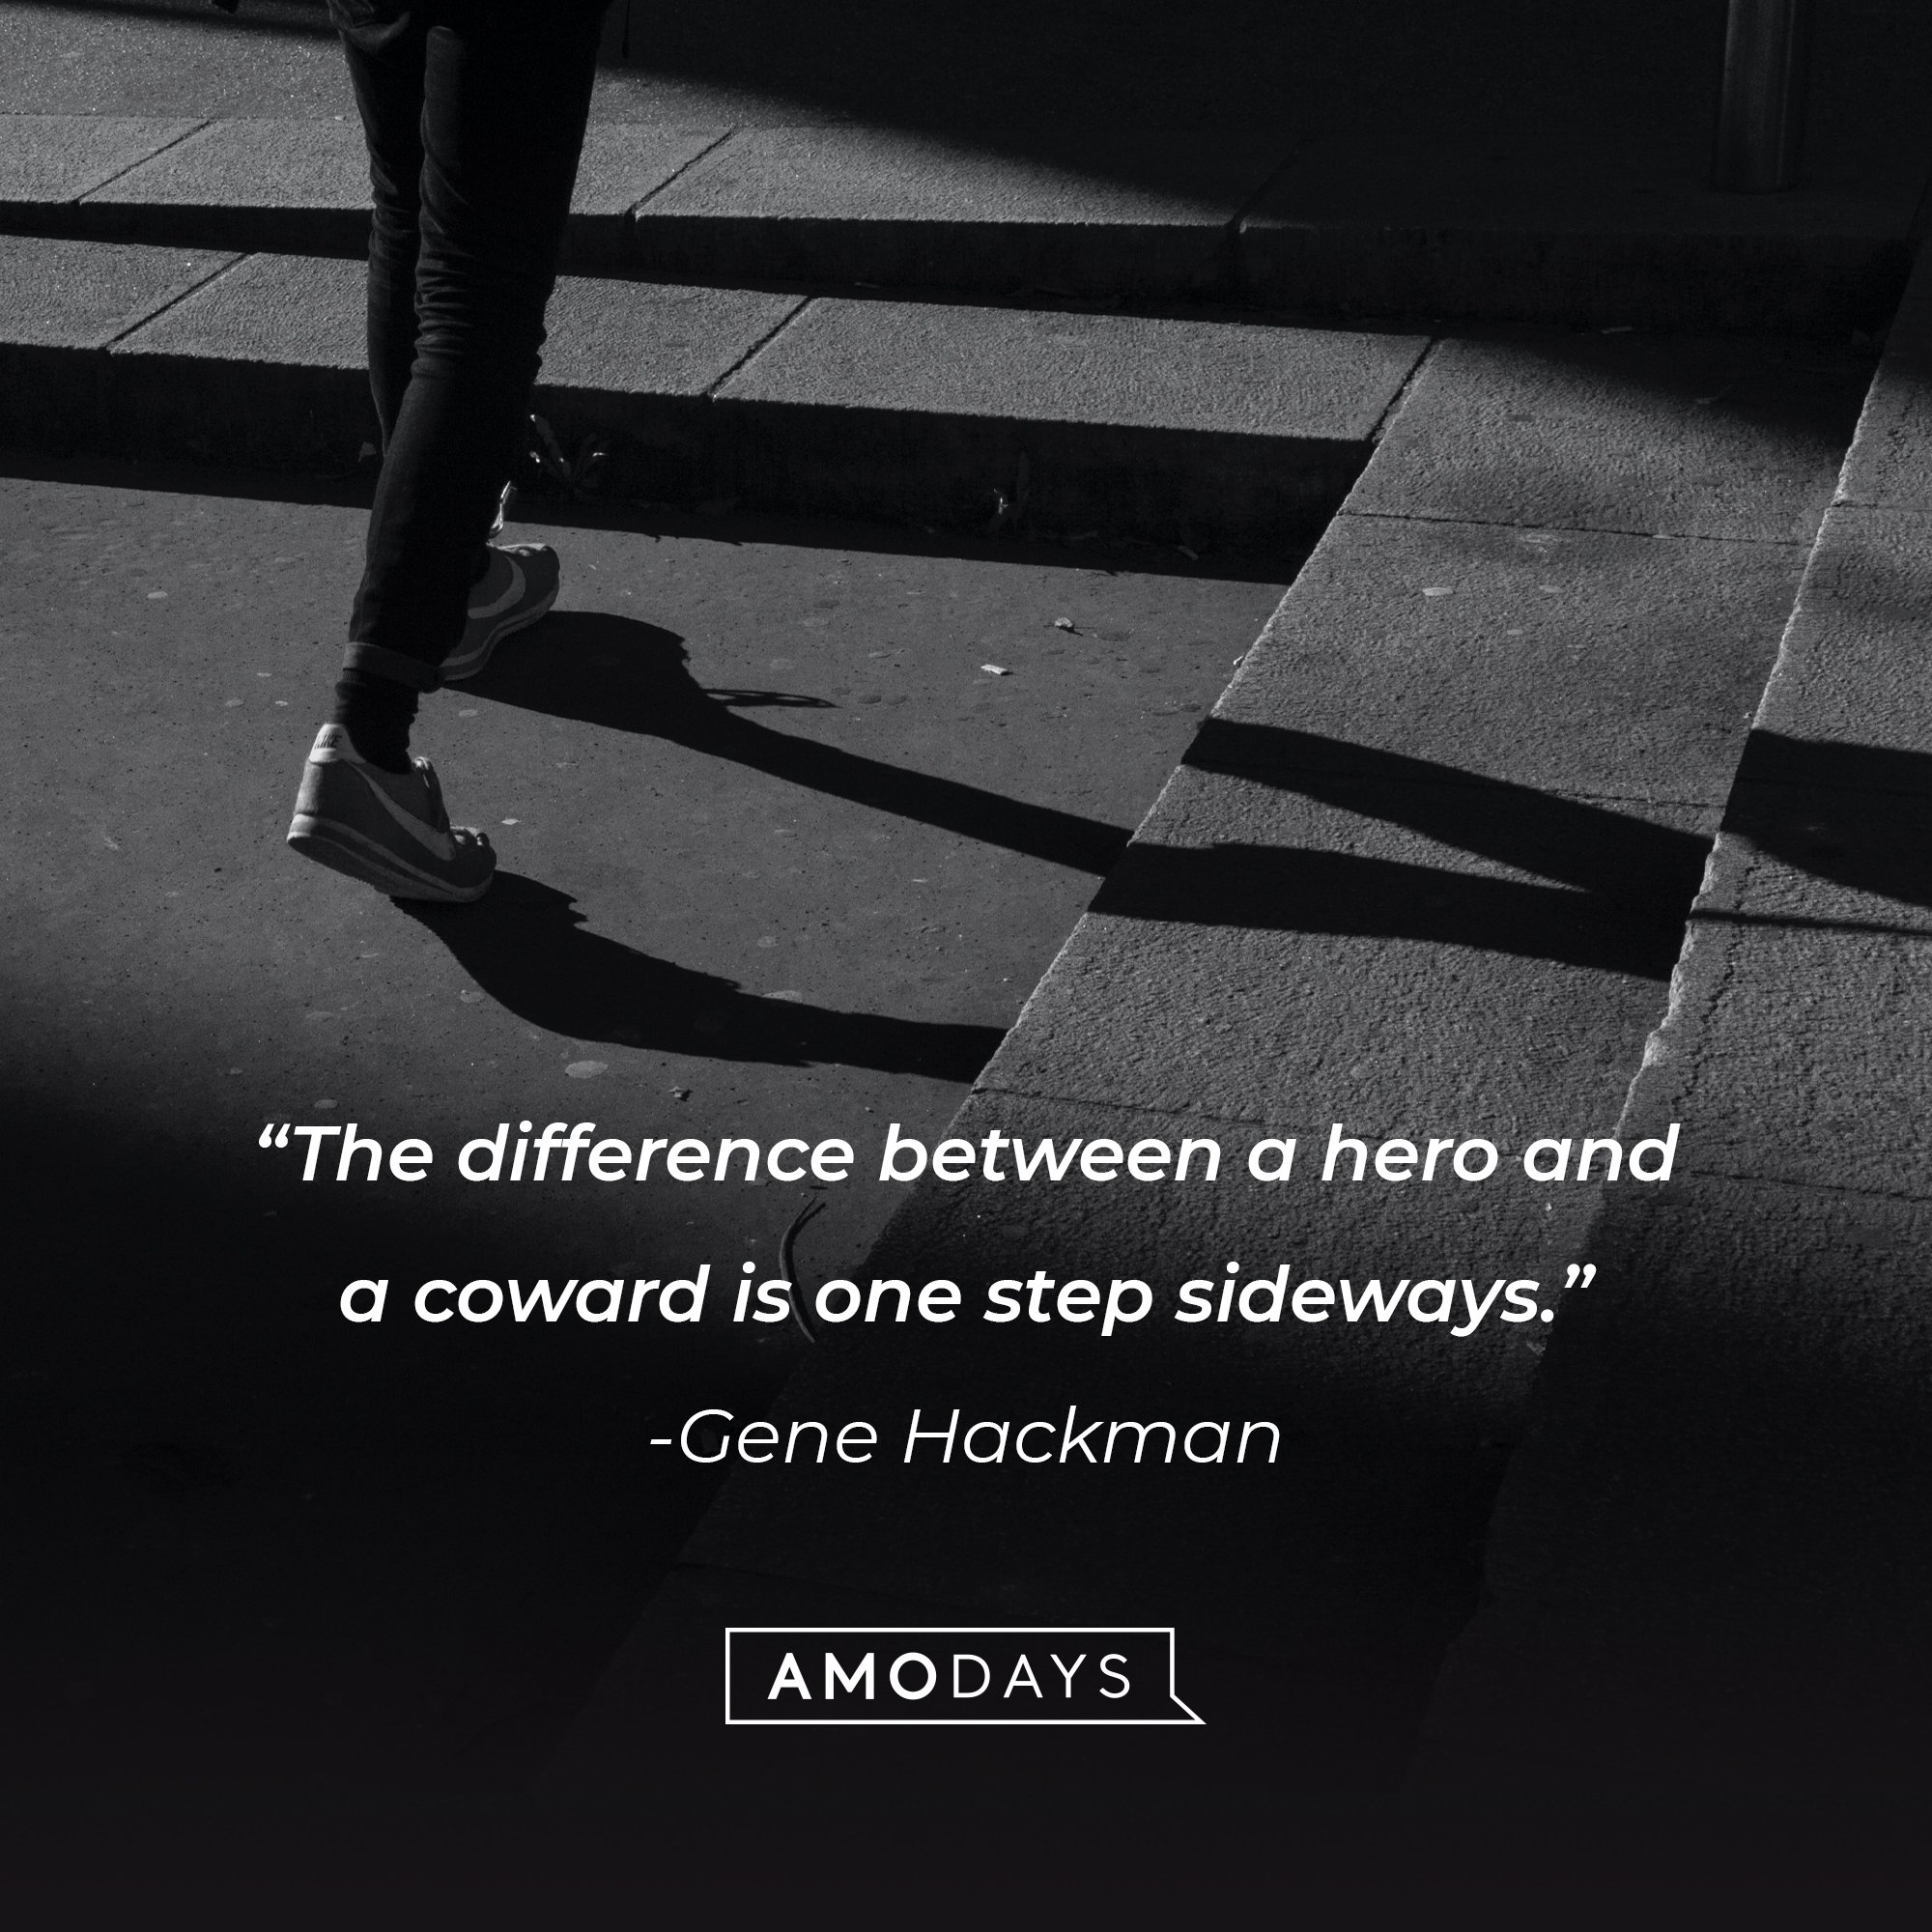 Gene Hackman’s quote: "The difference between a hero and a coward is one step sideways." | Image: AmoDays